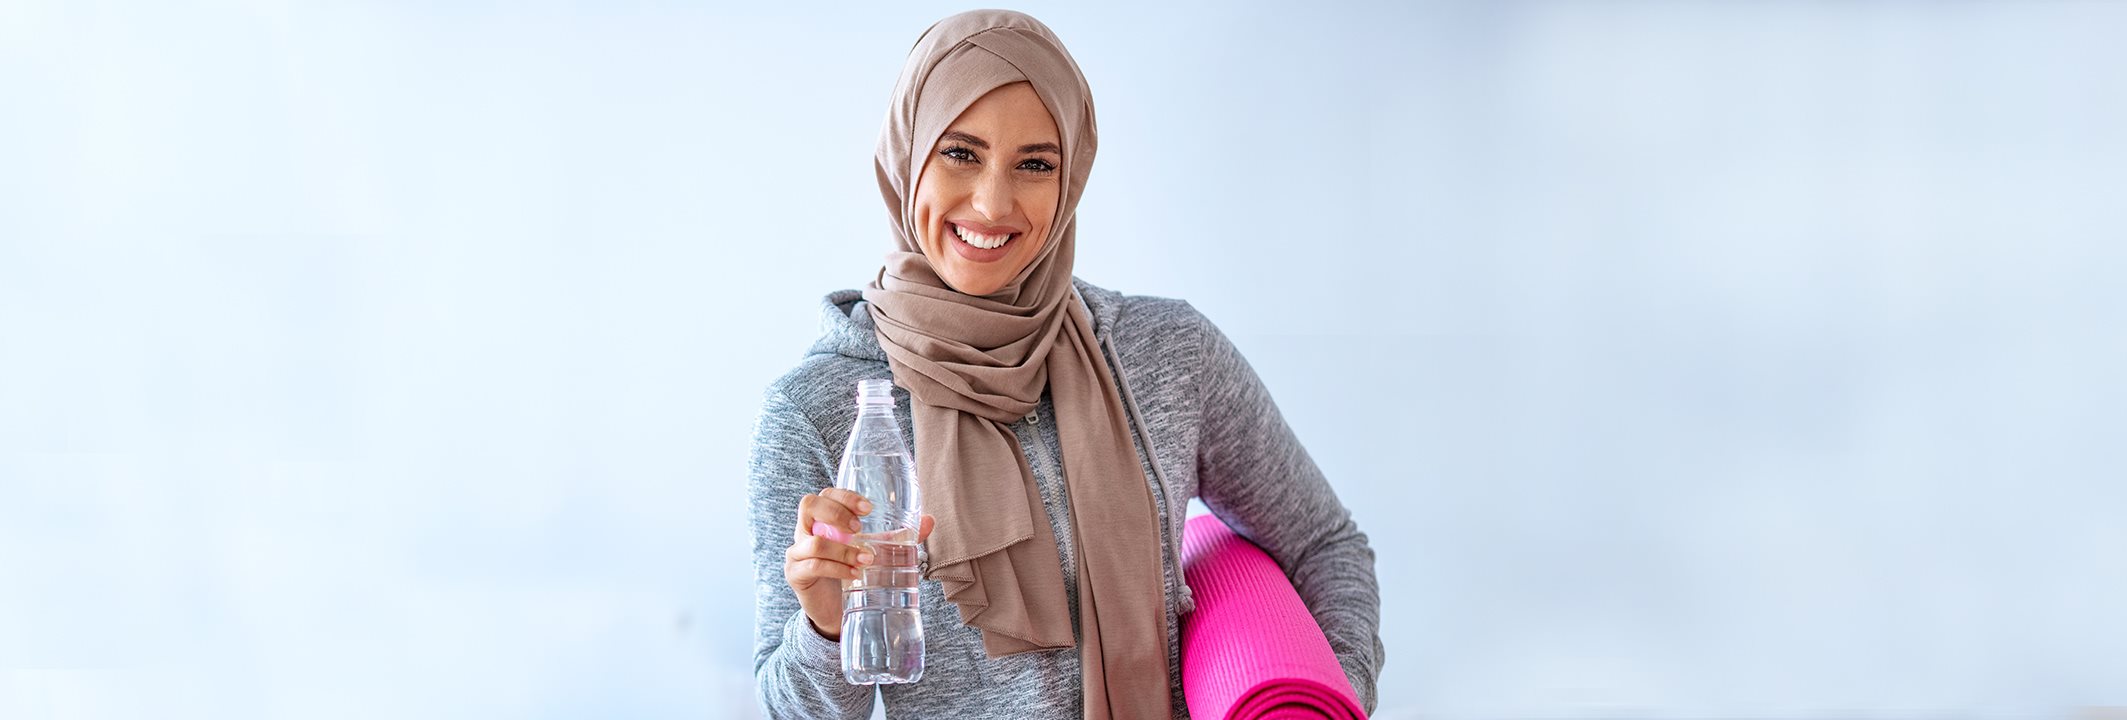 Fast, Pray, Exercise: Eucerin's Guide to Radiant Skin this Ramadan